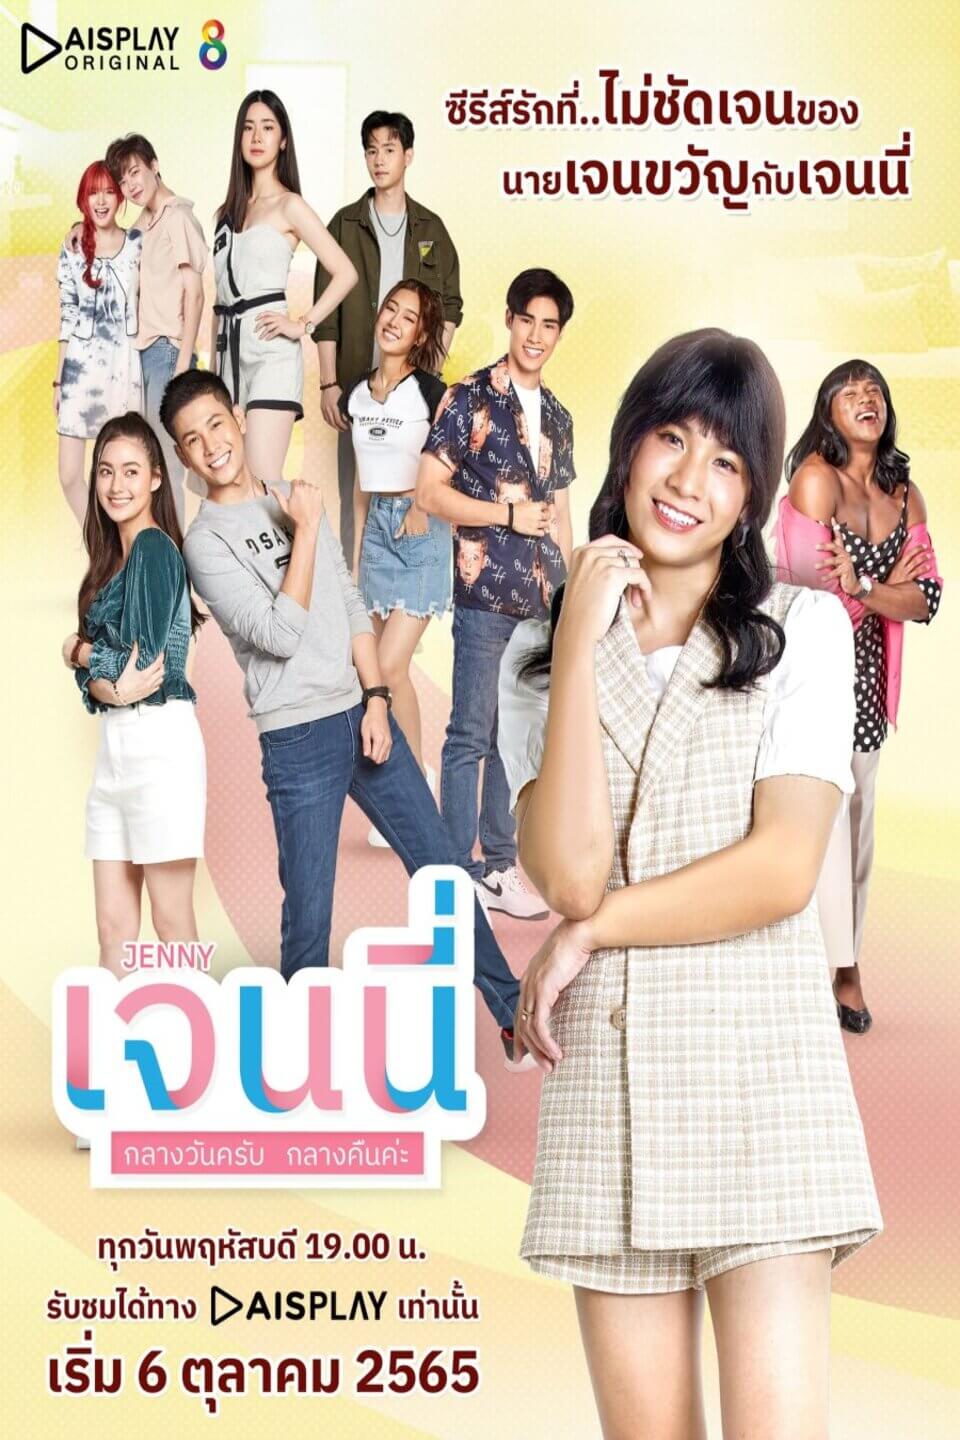 TV ratings for Jenny A.M/P.M (เจนนี่ กลางวันครับ กลางคืนค่ะ) in Italy. Channel 8 TV series